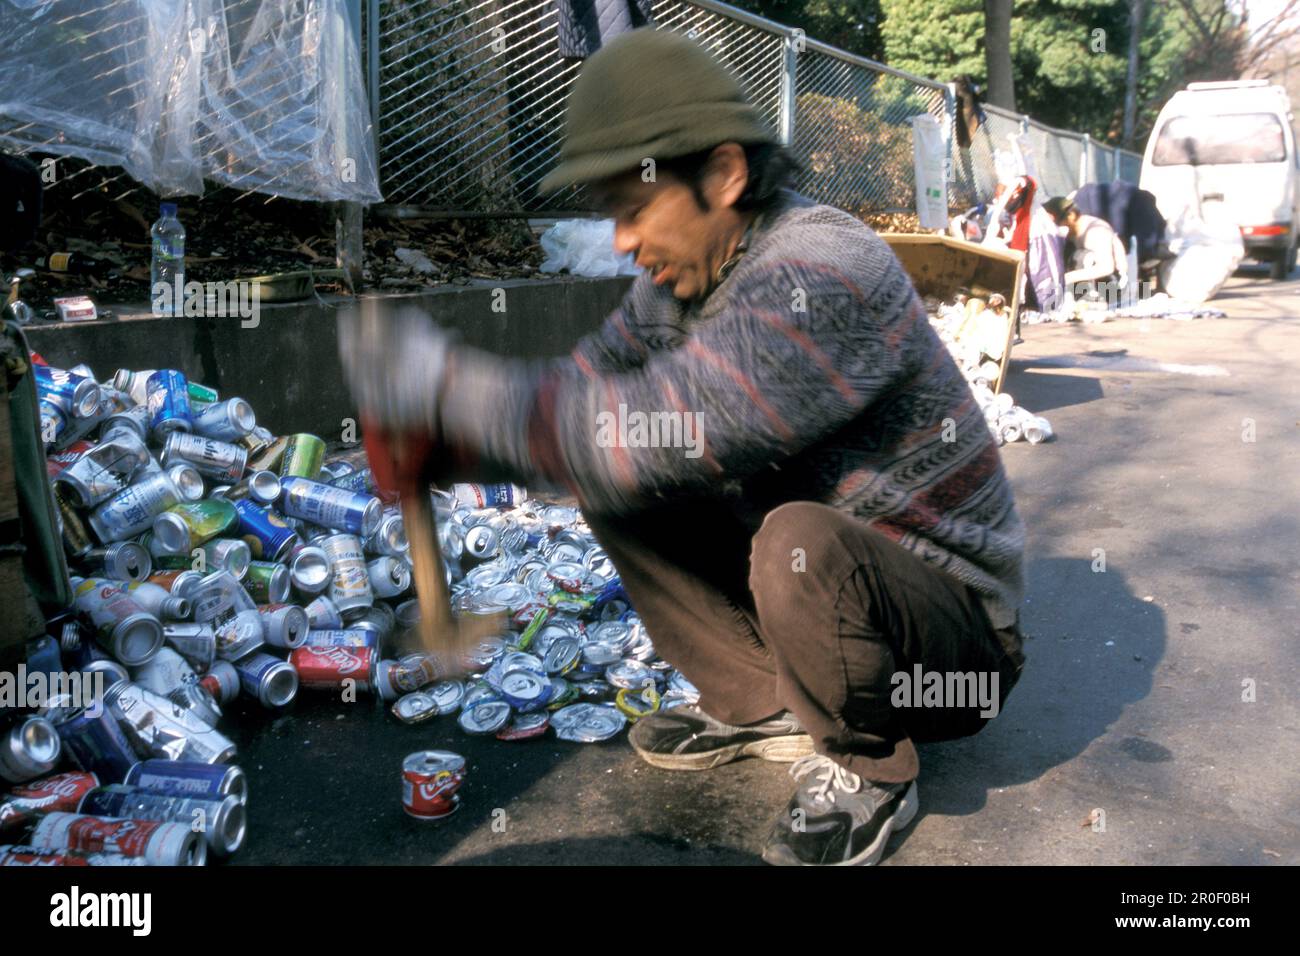 Homeless, Ueno Park, Tokyo, Japan, Temporary low paid jobs for homeless, collecting aluminium cans for recycling, crushing cans Obdachlose, notduerfti Stock Photo